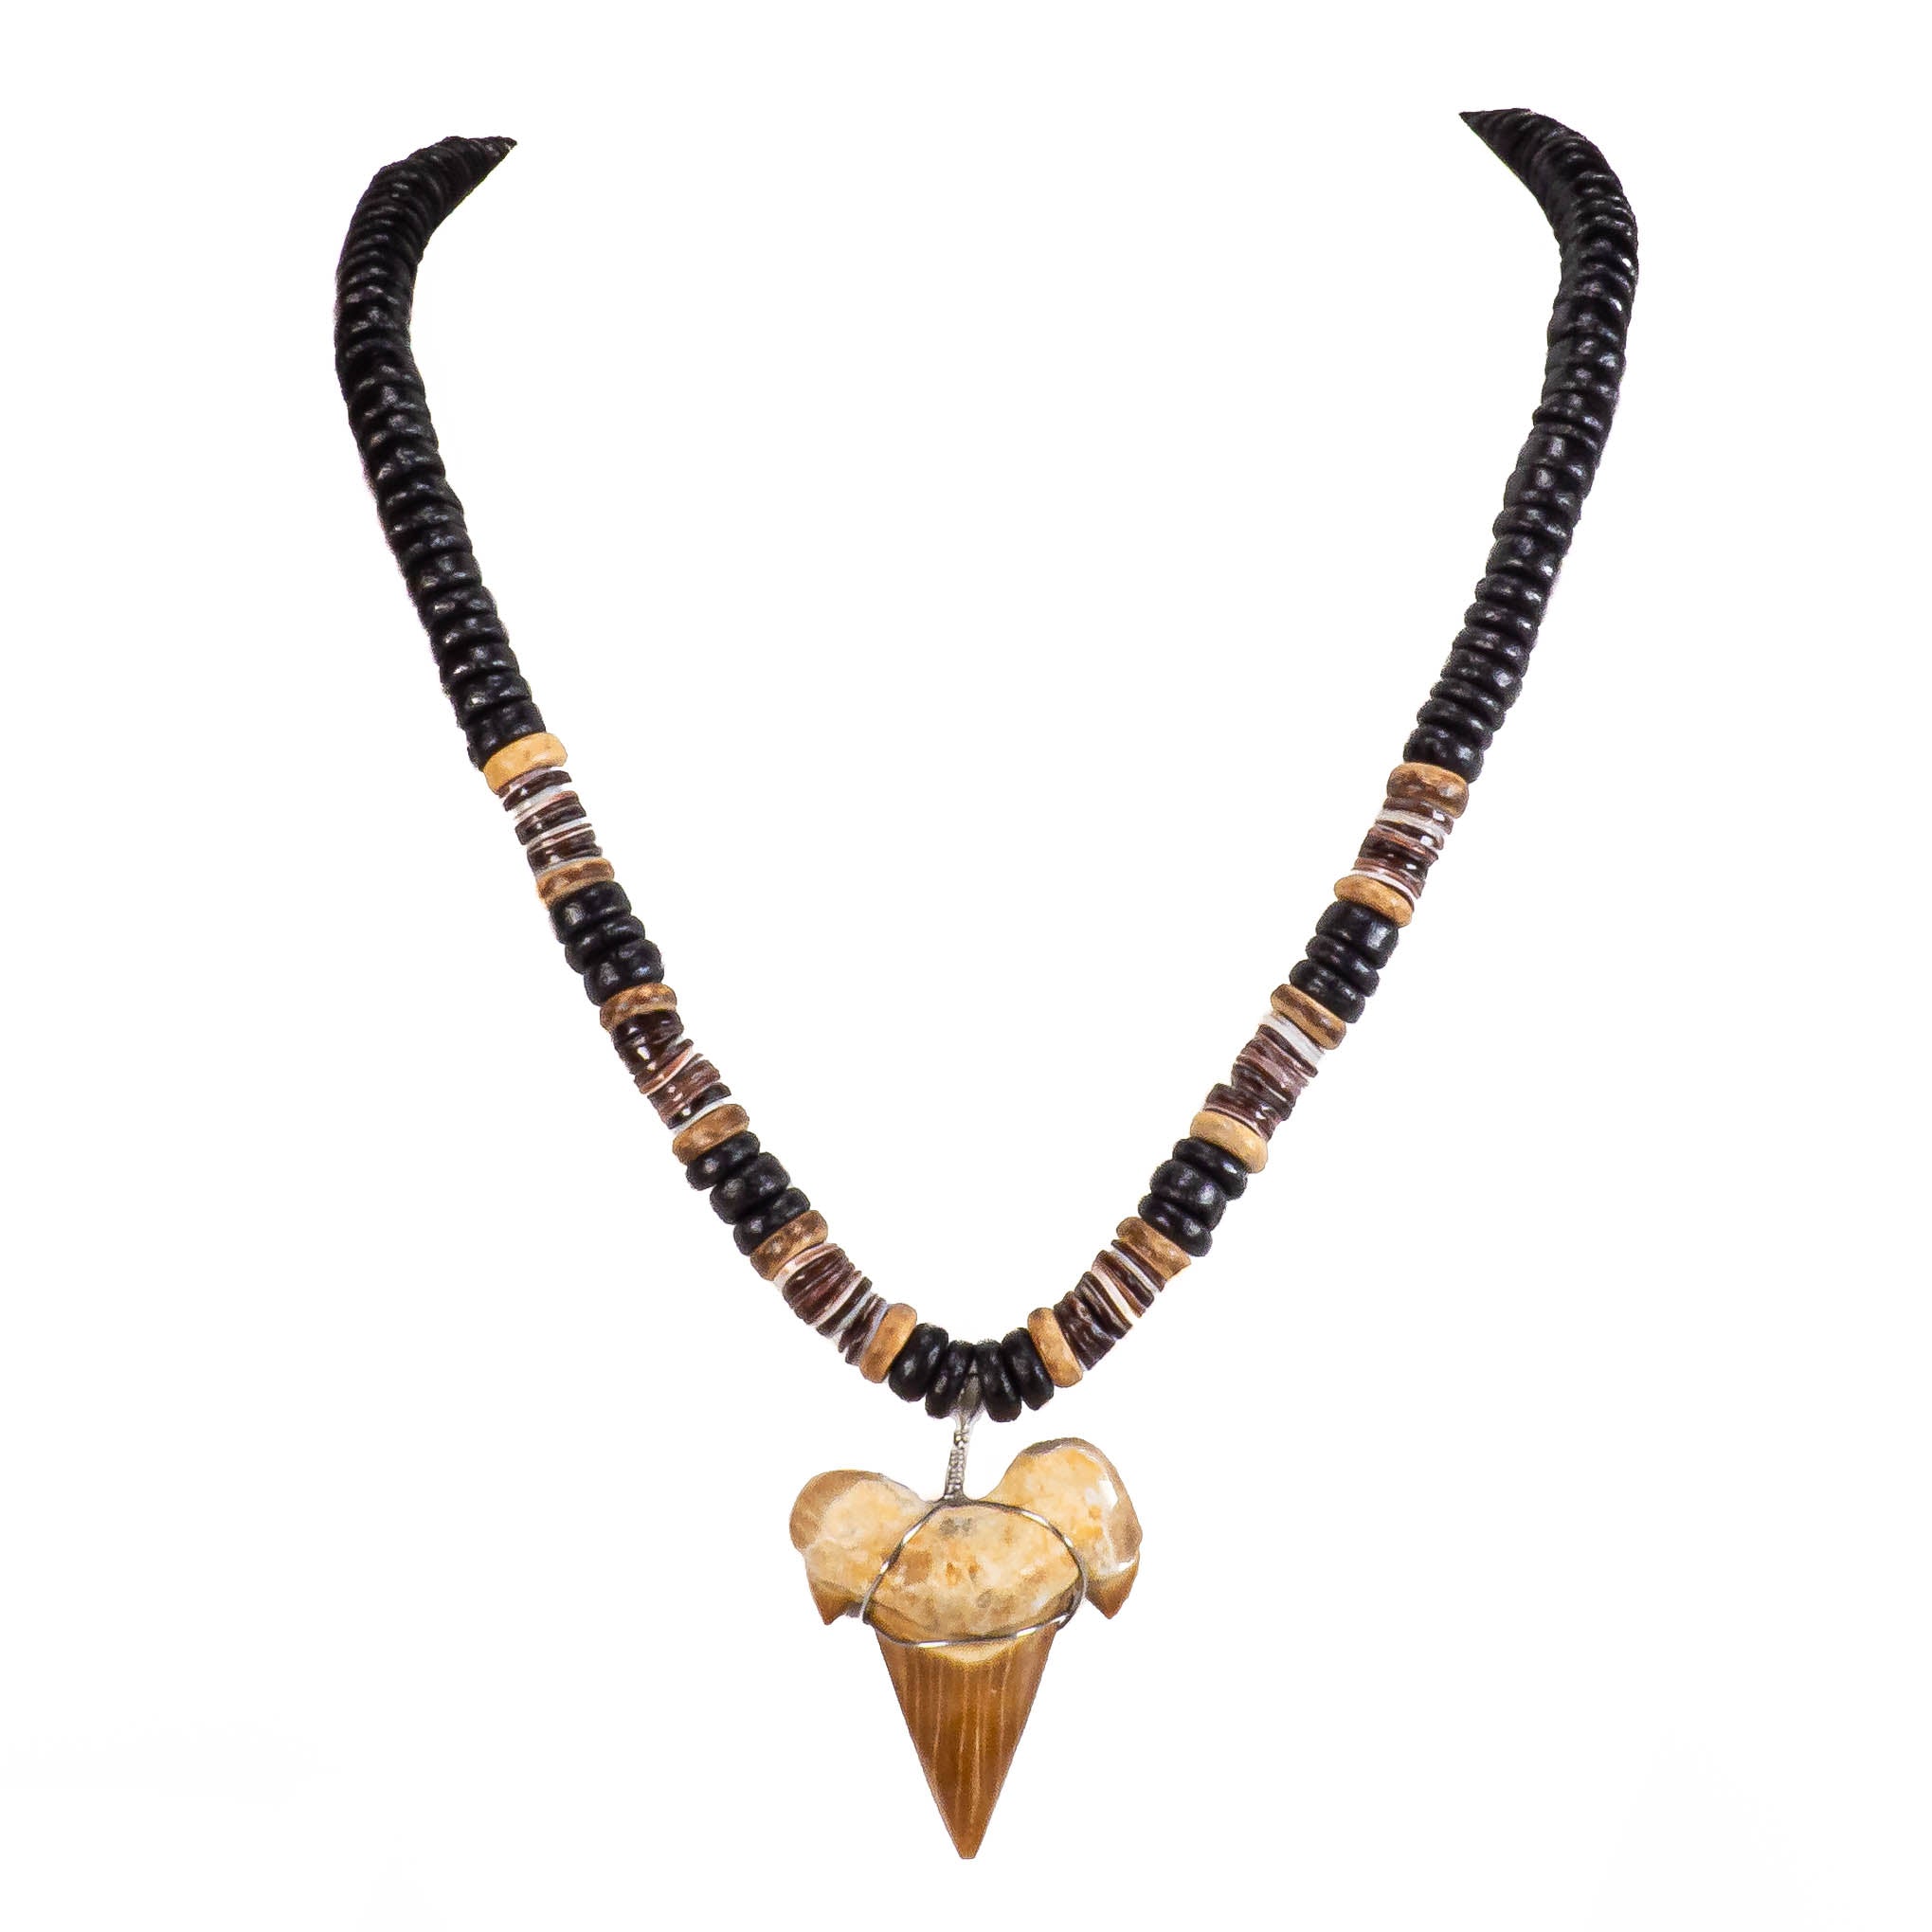 1¼"+ Shark Tooth Pendant on Black Coconut and Oyster Shell Beads Necklace